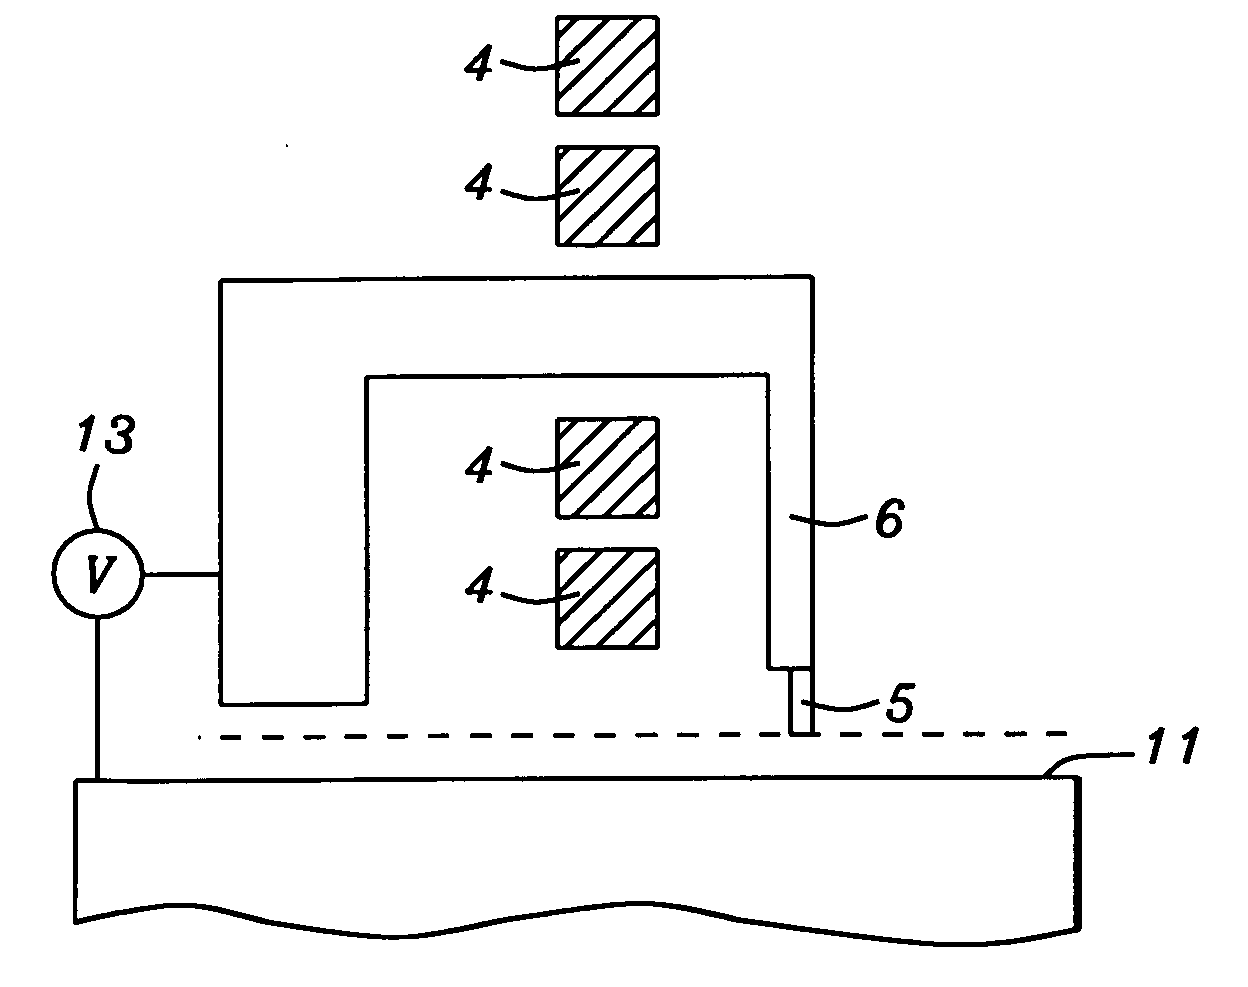 Electric field assisted magnetic recording